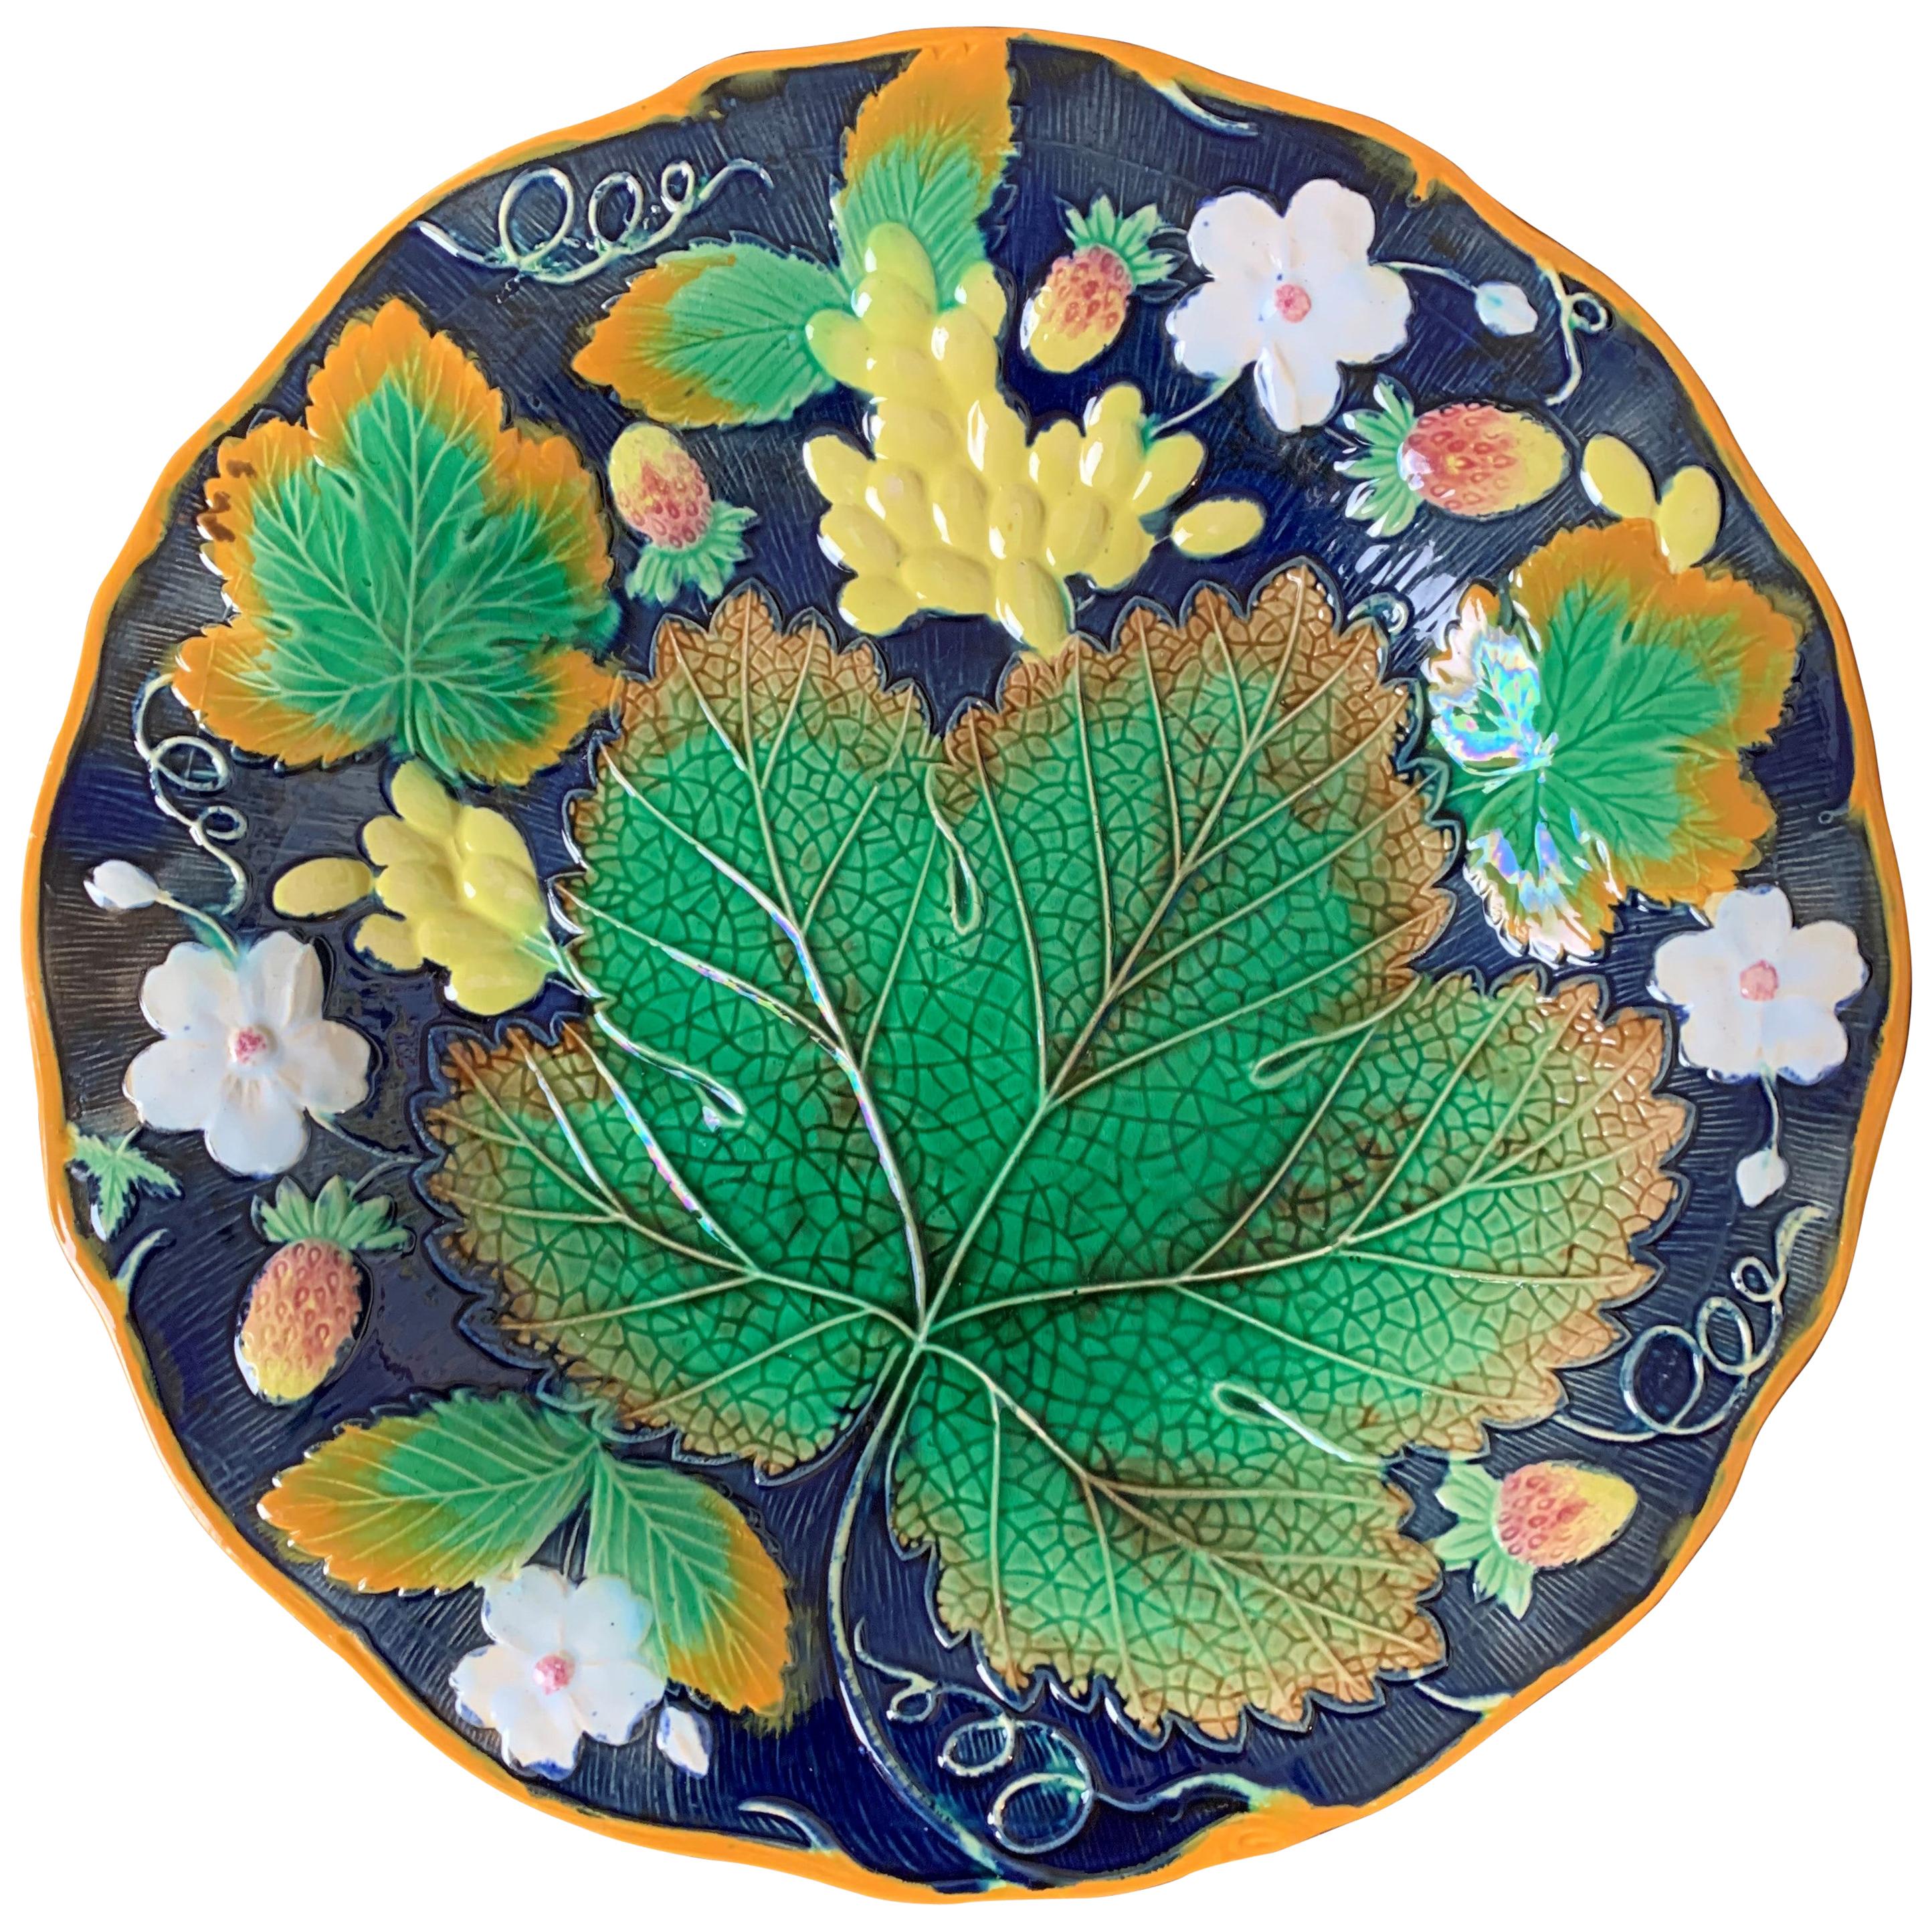 Wm. Brownfield Majolica Leaf and Strawberry Plate in Cobalt Blue, English, 1876 For Sale